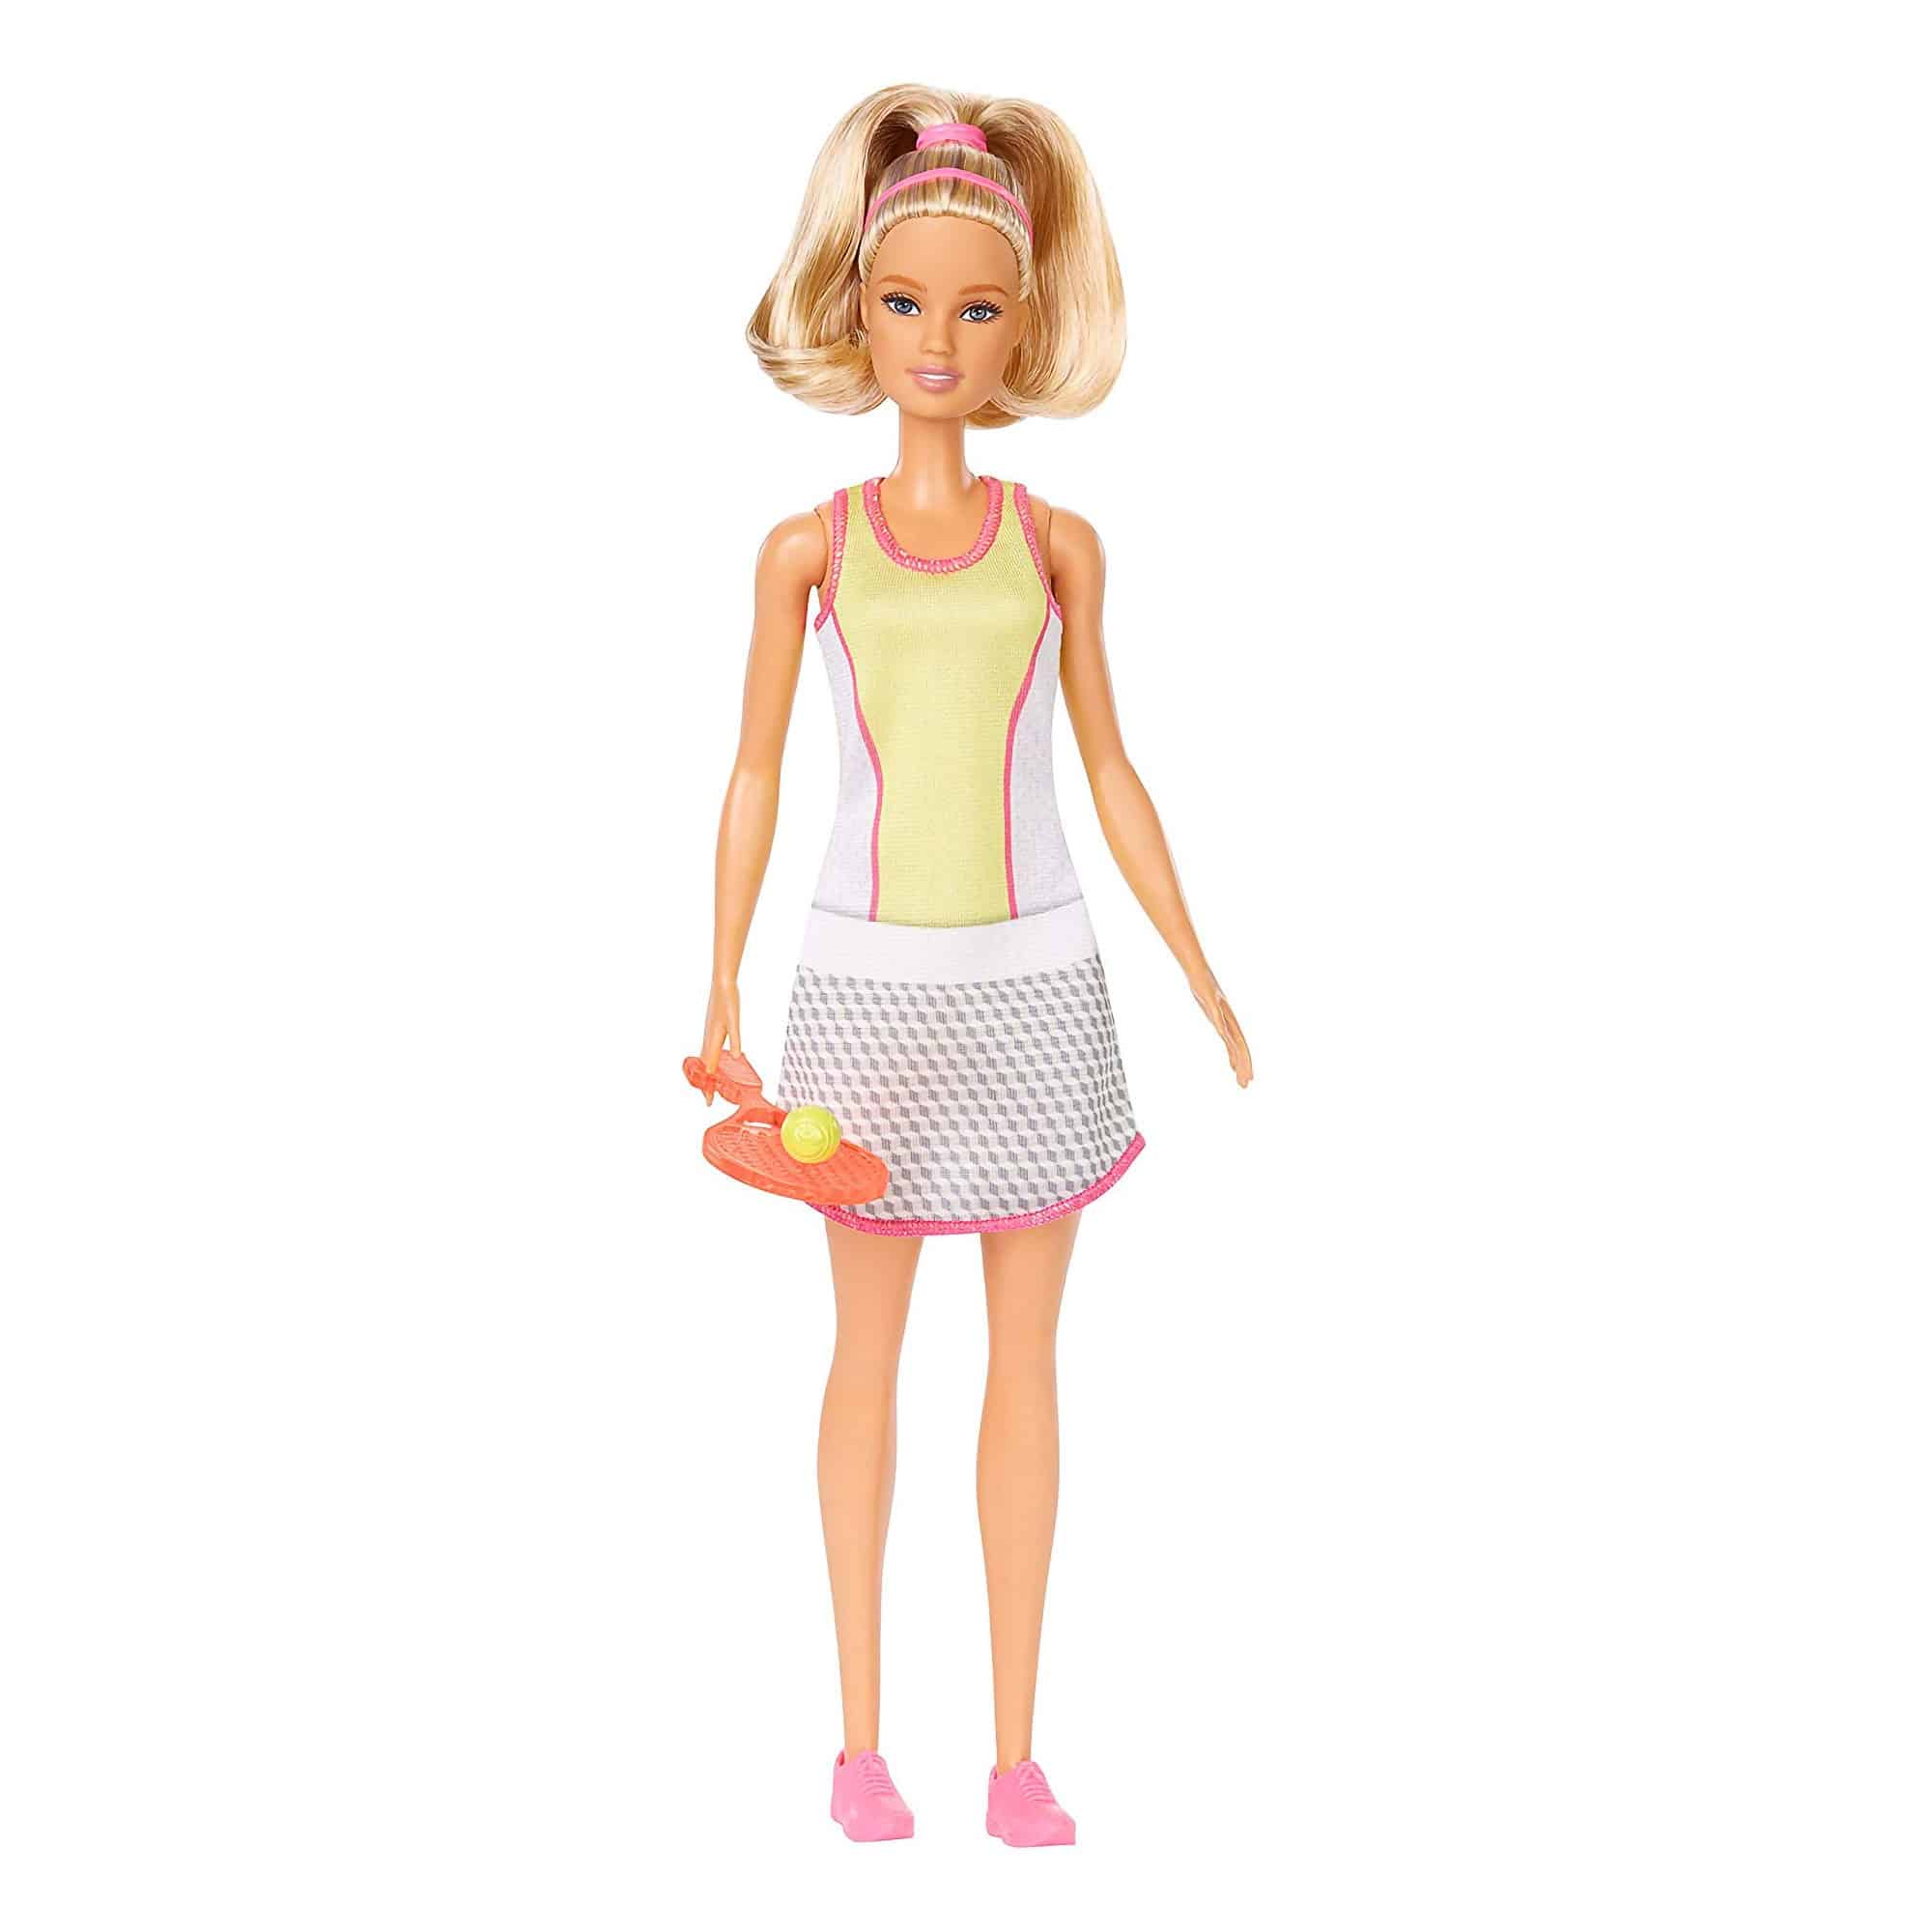 Barbie - You Can Be Anything - Tennis Player